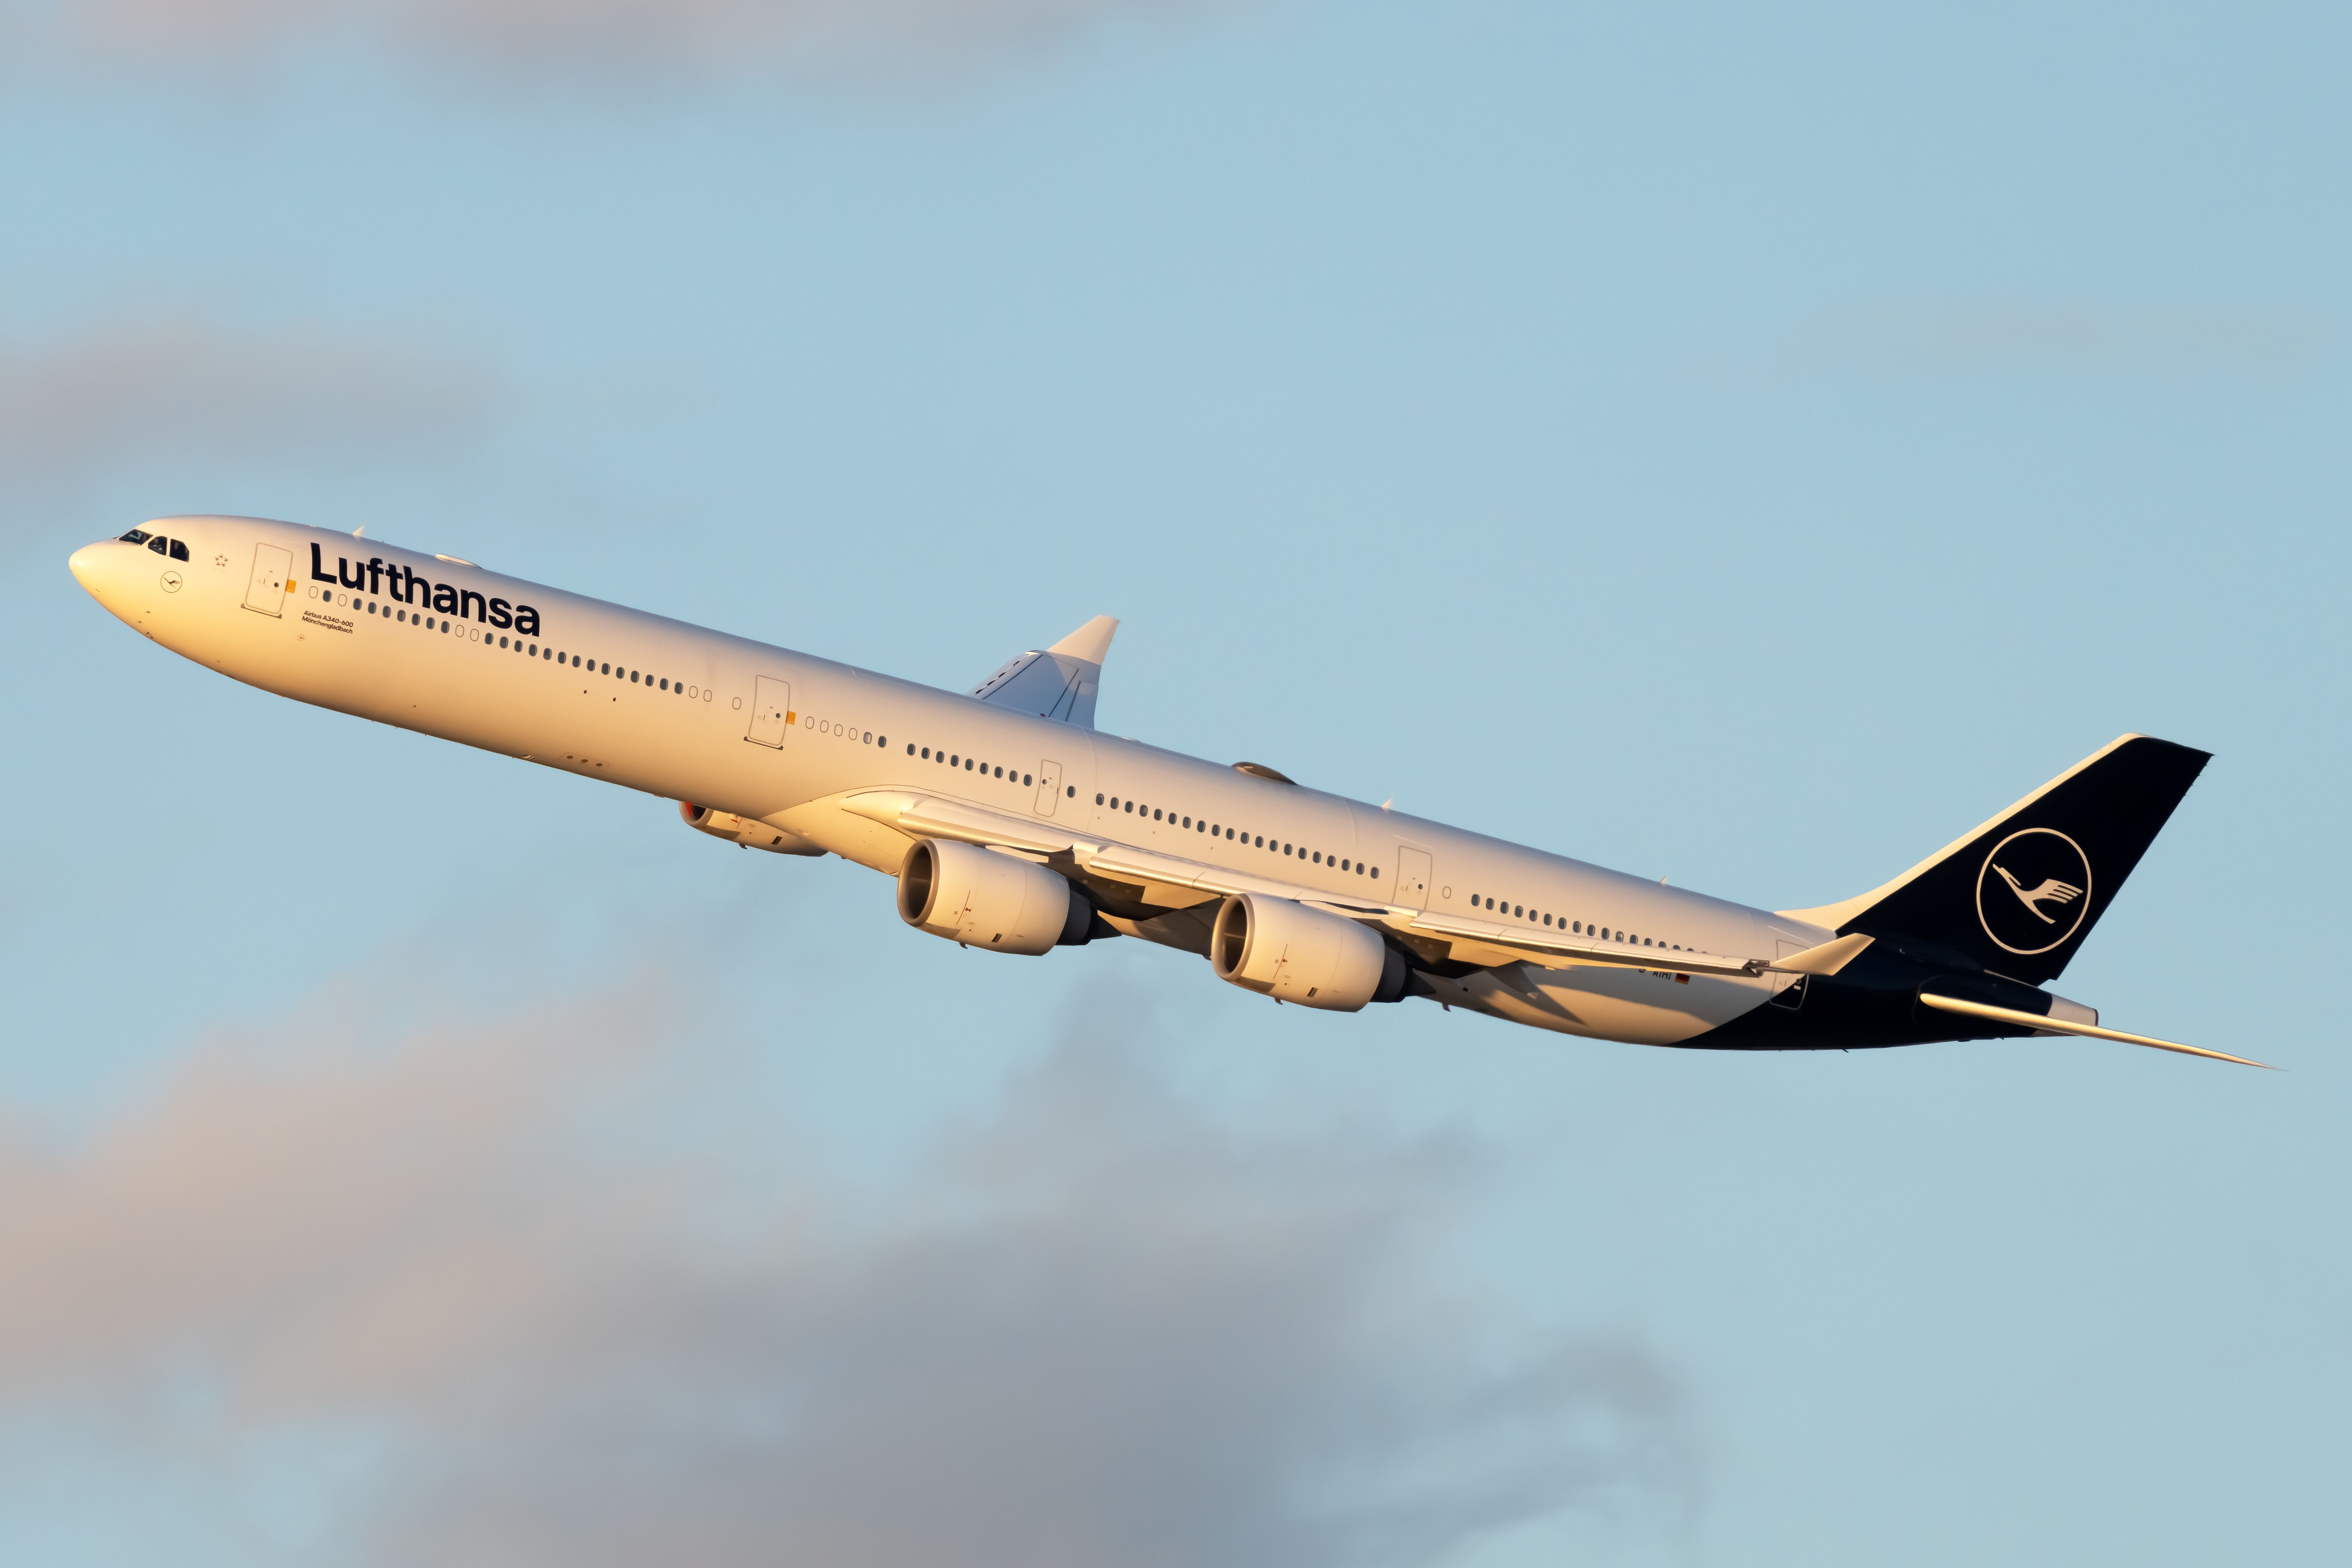 A Lufthansa Airbus A340 flying in the sky.